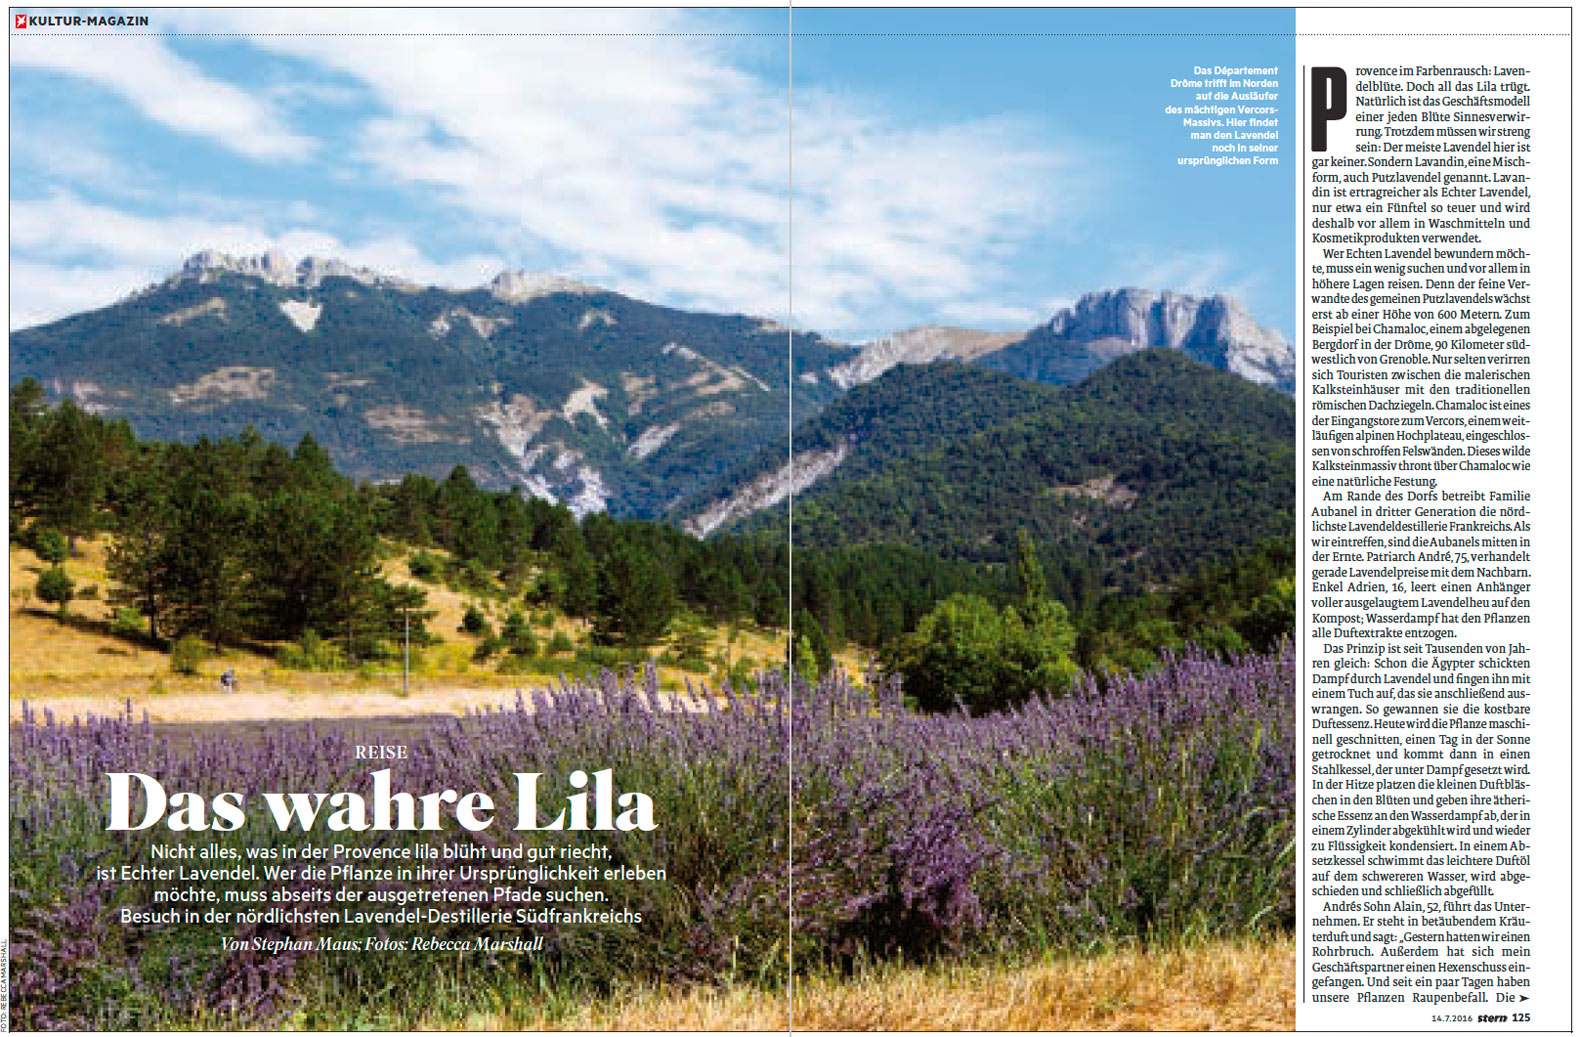 Double-page spread from Stern magazine showing field of lavender